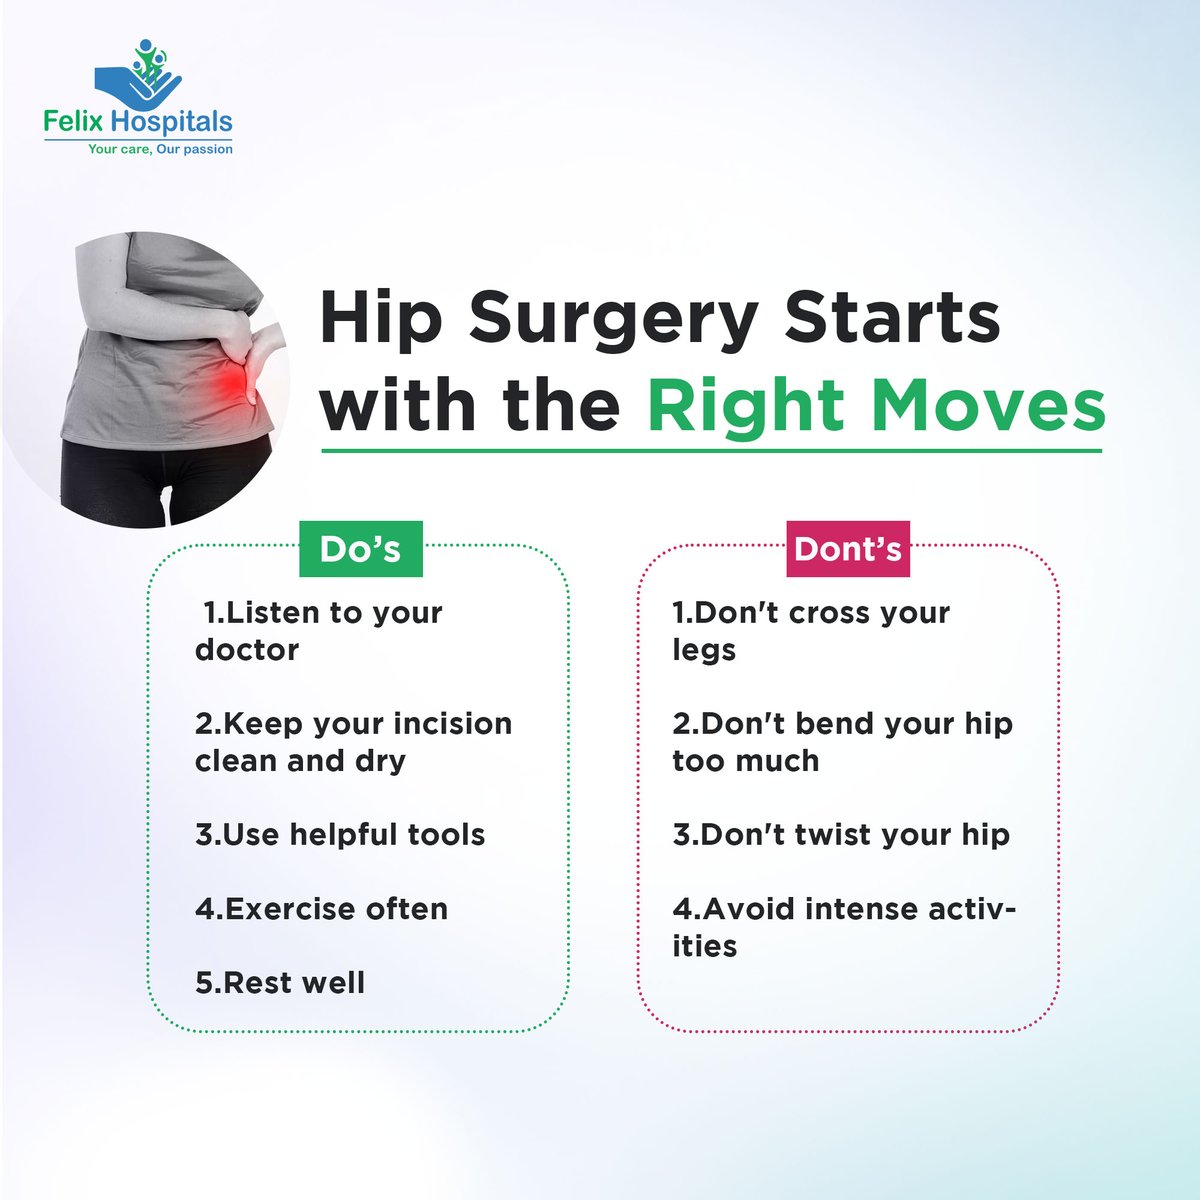 Follow your doctor's do's and don'ts after hip surgery for a smooth recovery. Keep the incision clean, rest, and eat well. If worried, consult your doctor. Here's to a speedy recovery!🙌 #HipSurgeryRecovery #PatientEducation #Doctors #HipSurgery #journey #RecoveryJourney